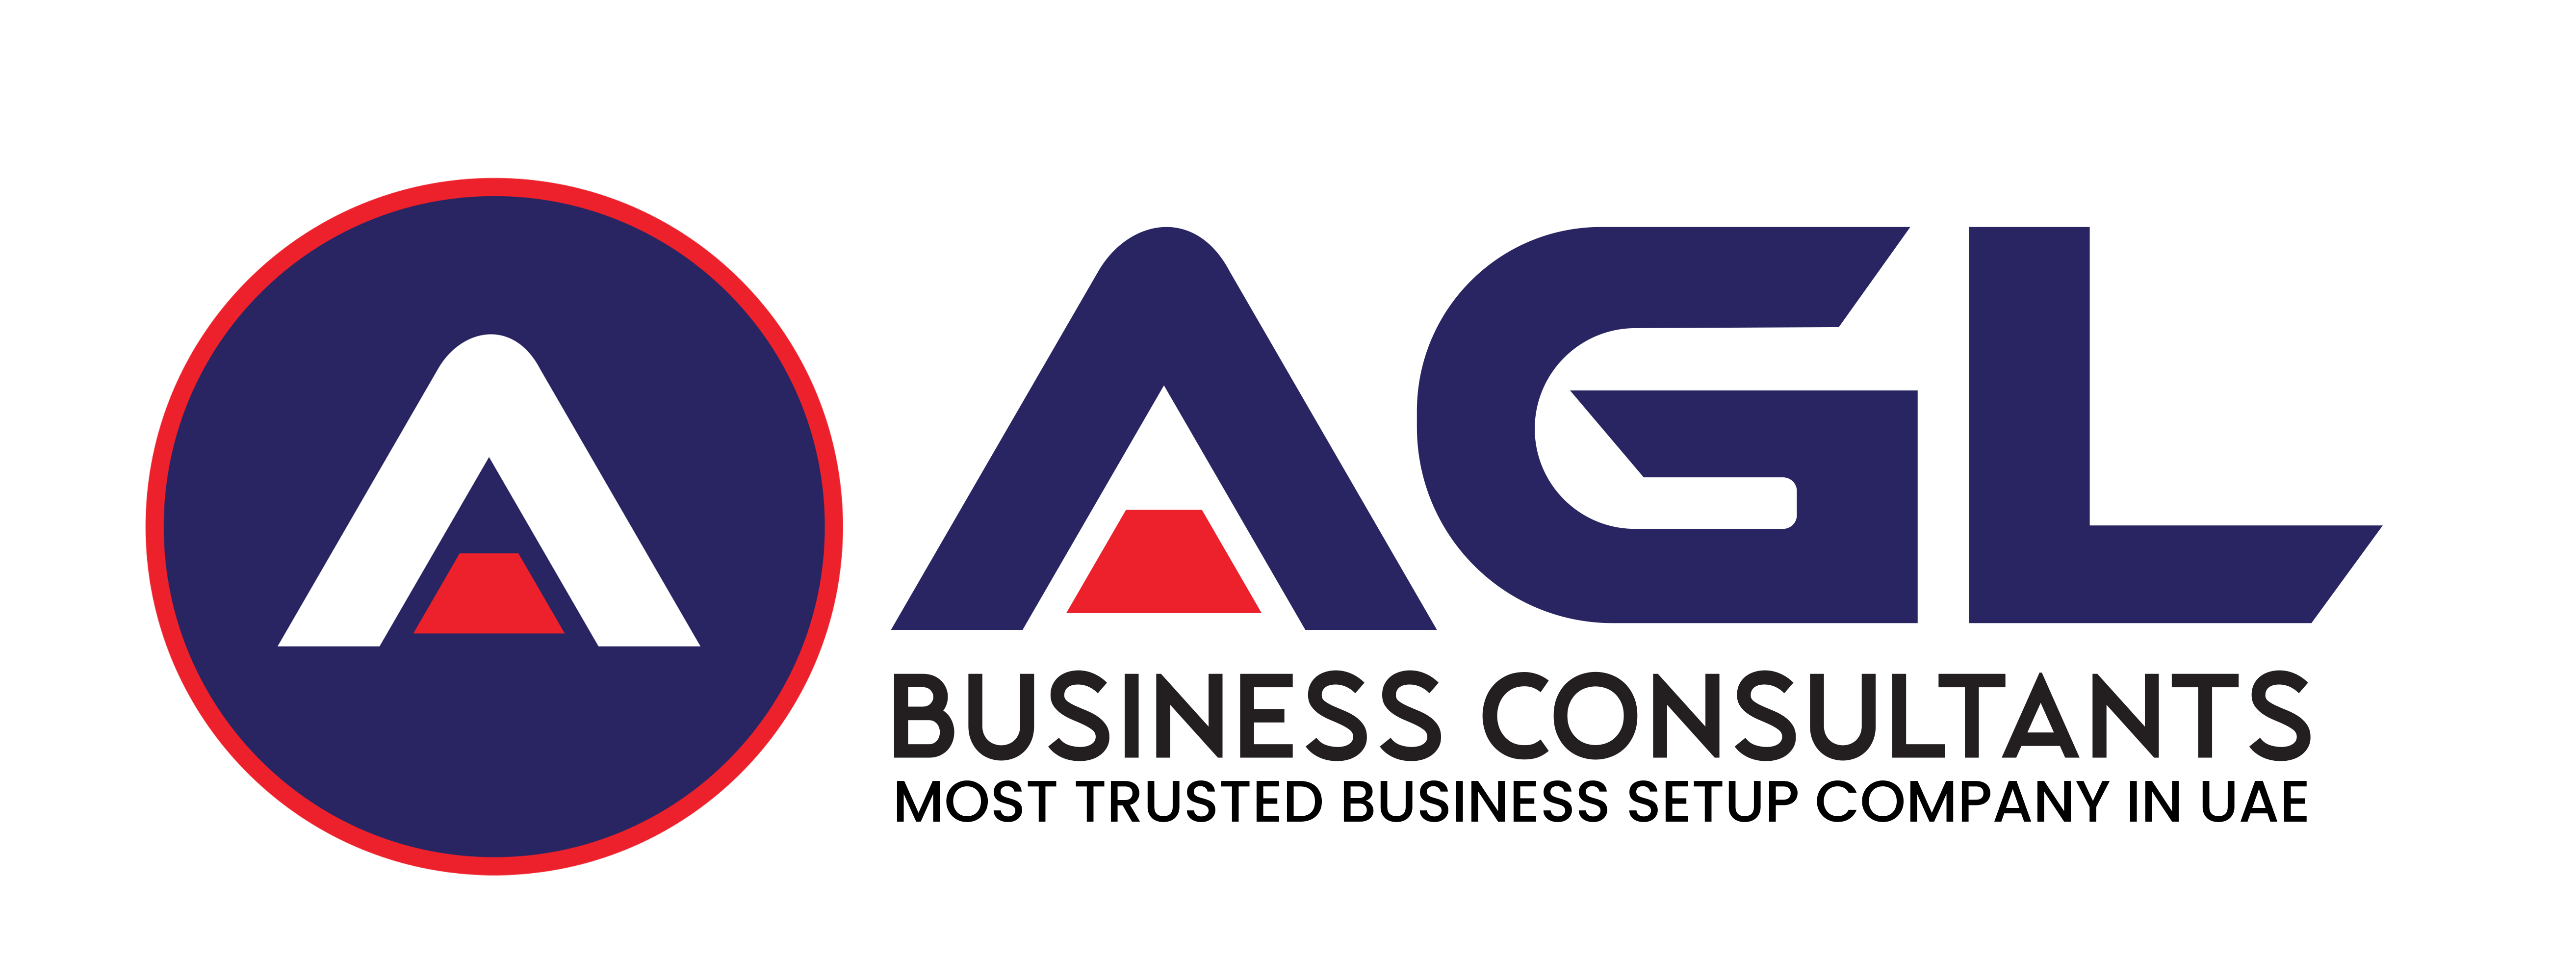 AGL Business Consultants